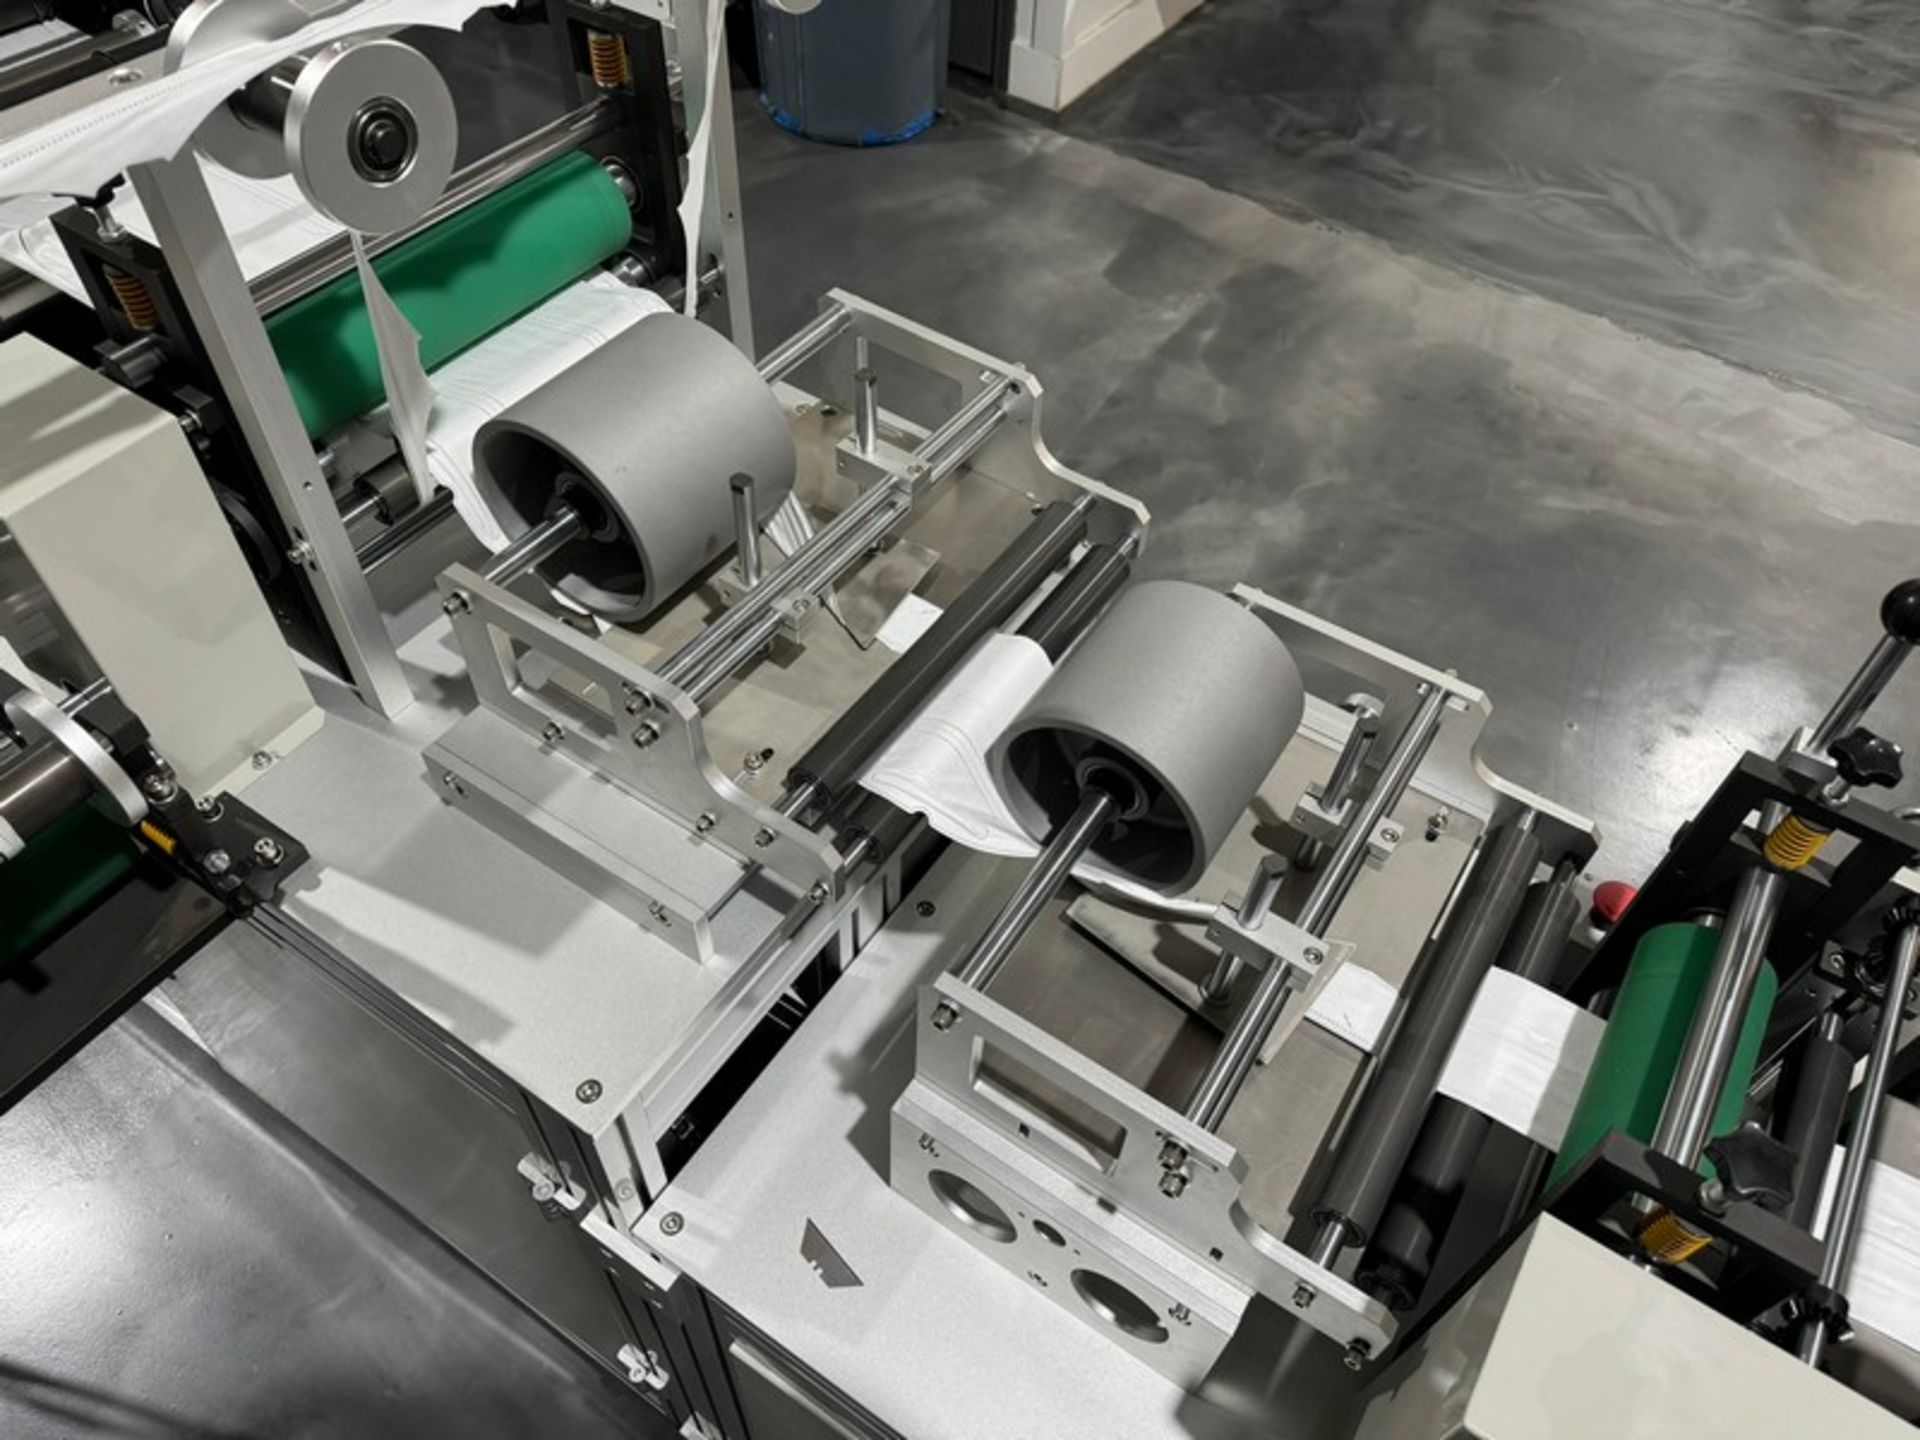 2022 KYD Automatic 6,000 Units Per Hour Mask Manufacturing Line, Includes Unwinding Station, Rolling - Image 14 of 30